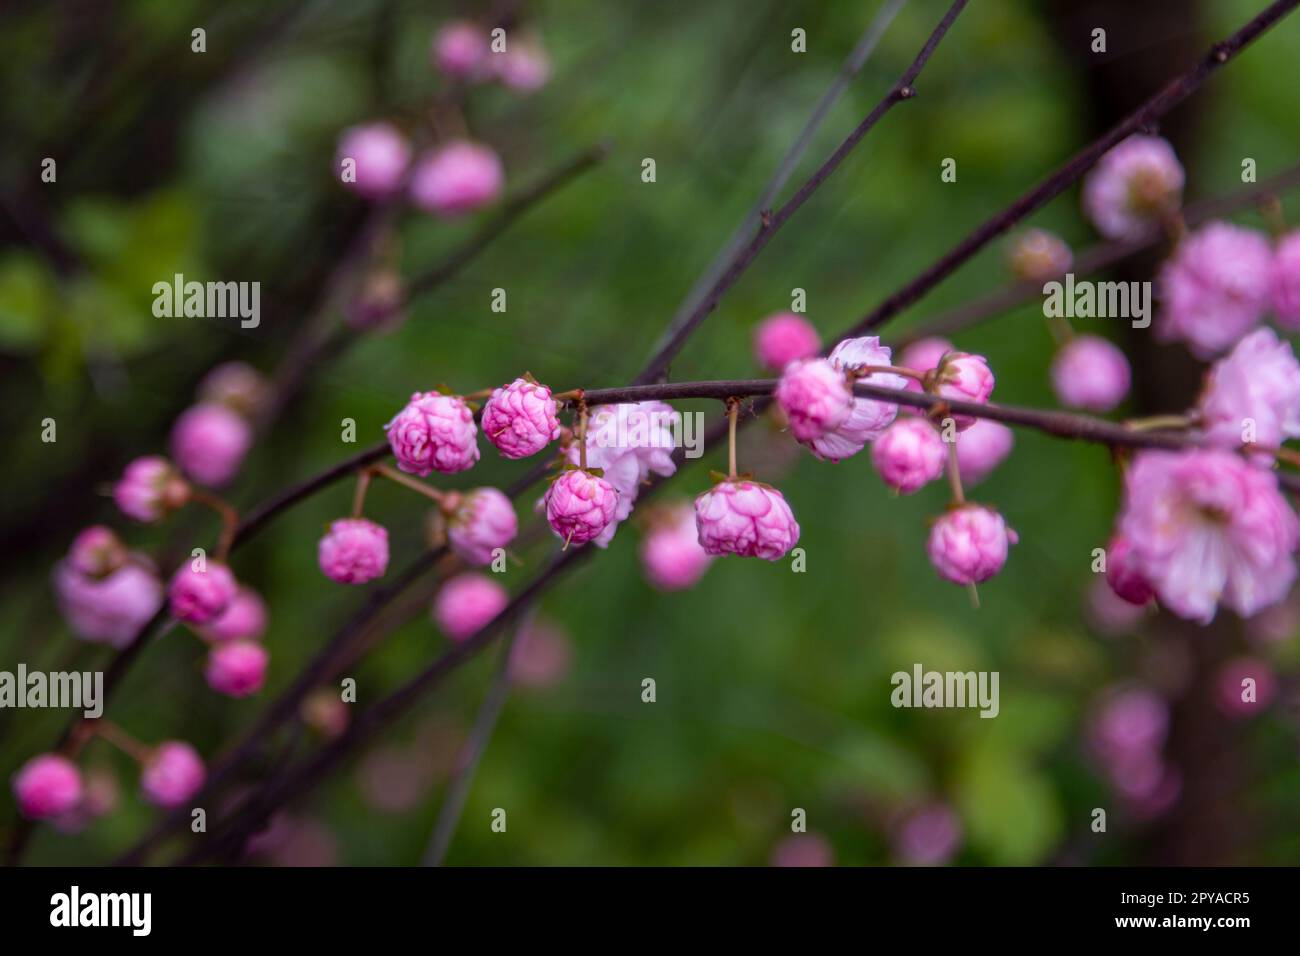 Beautiful blooming Prunus triloba also called flowering almond bush branches with pink flowers. Spring nature. Stock Photo